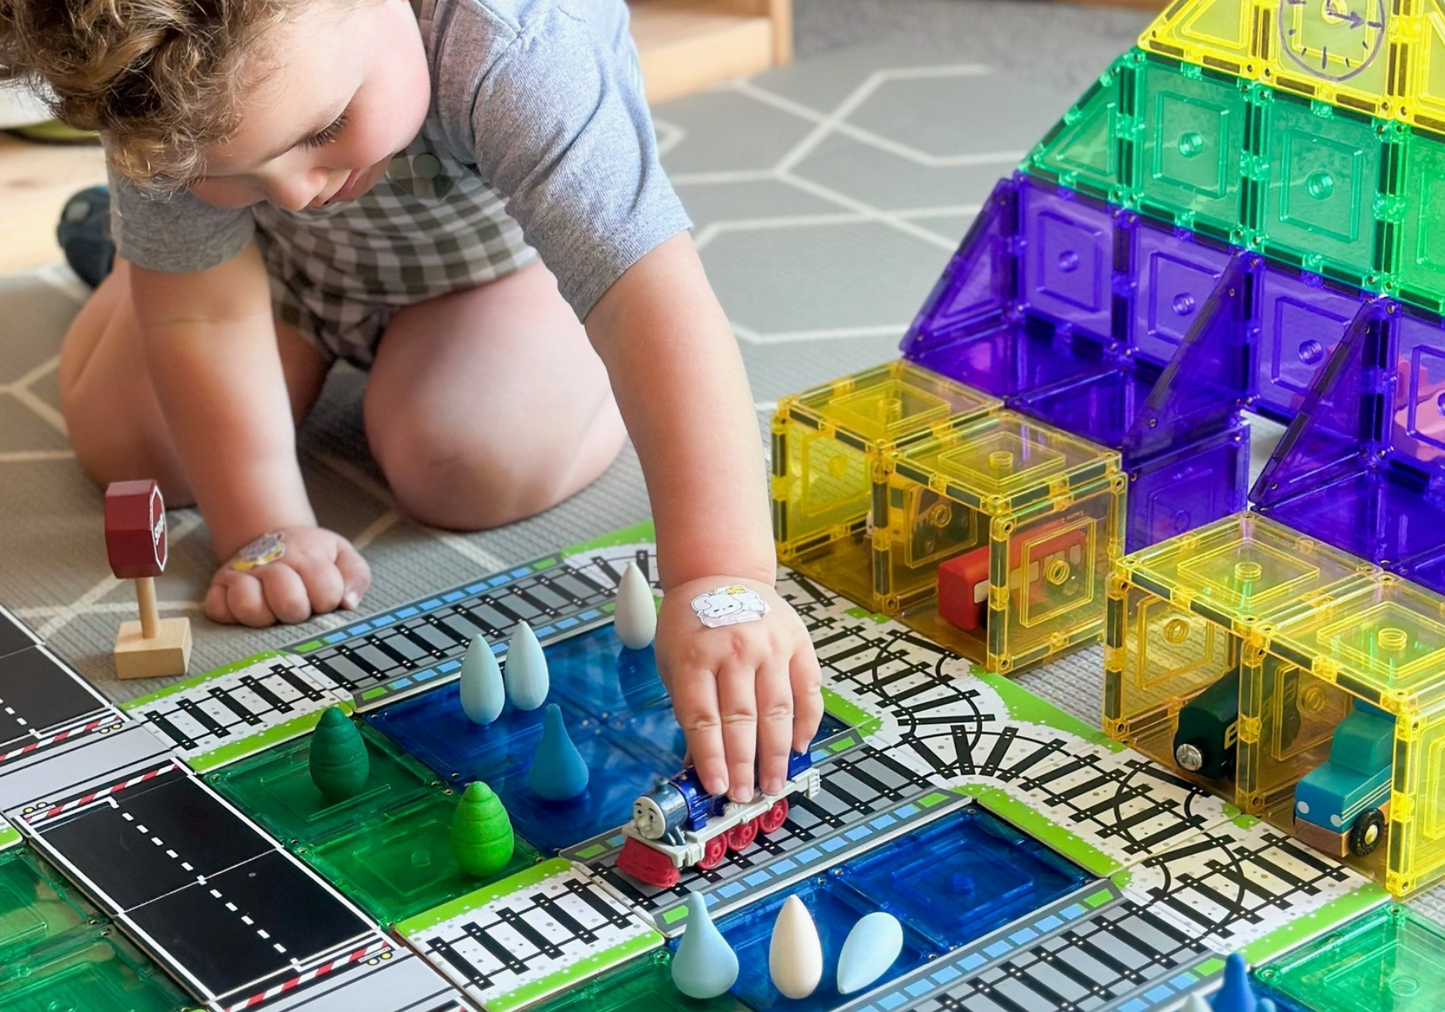 Learn & Grow - Magnetic Tile Topper - Train Pack (36 Piece)